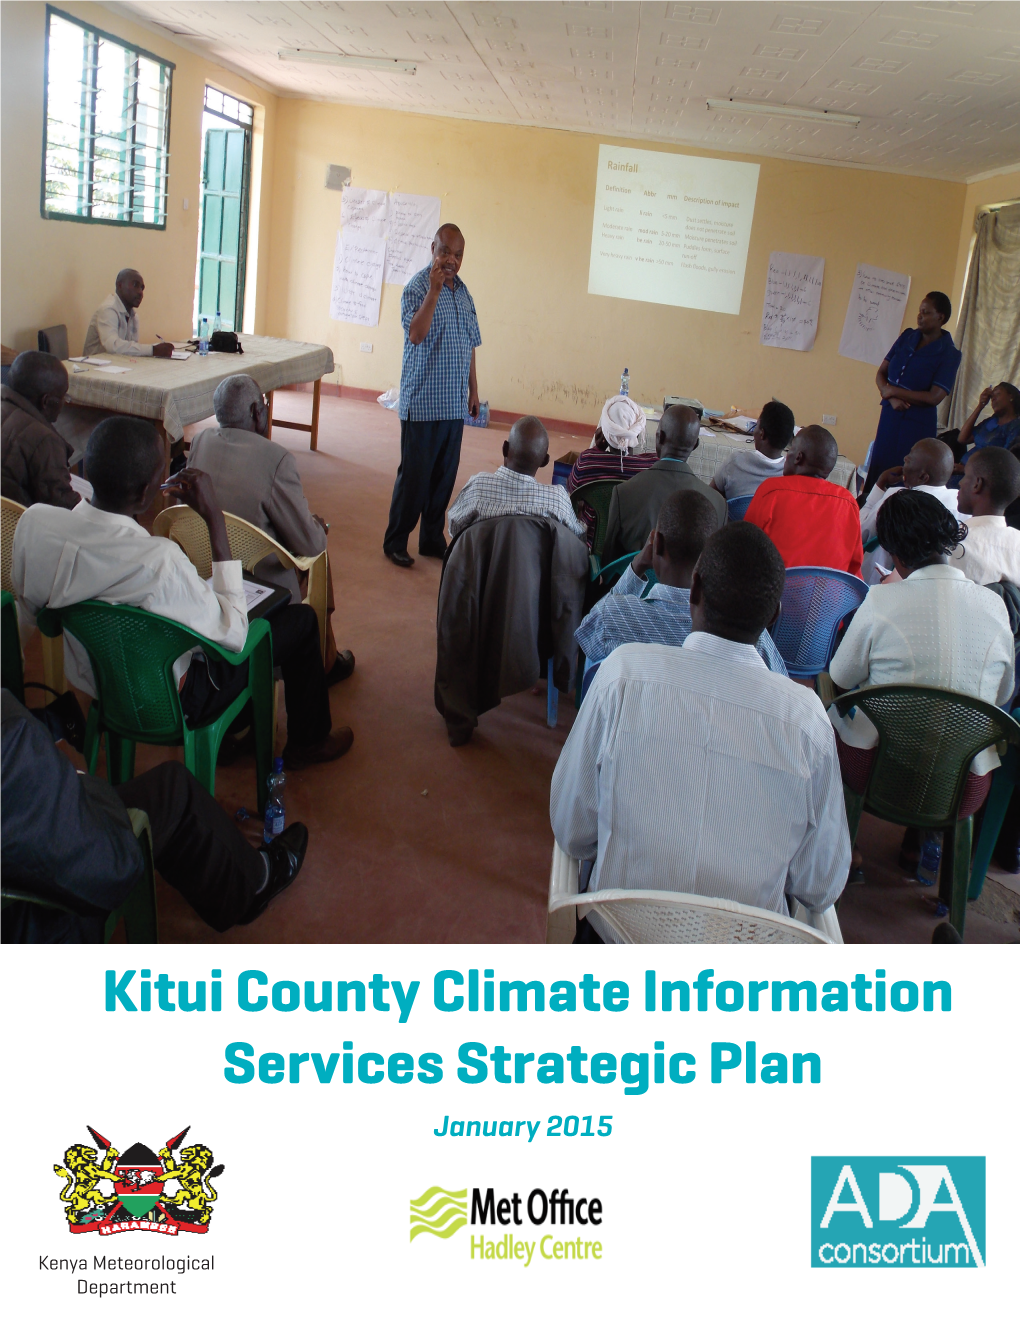 Kitui County Climate Information Services Strategic Plan January 2015